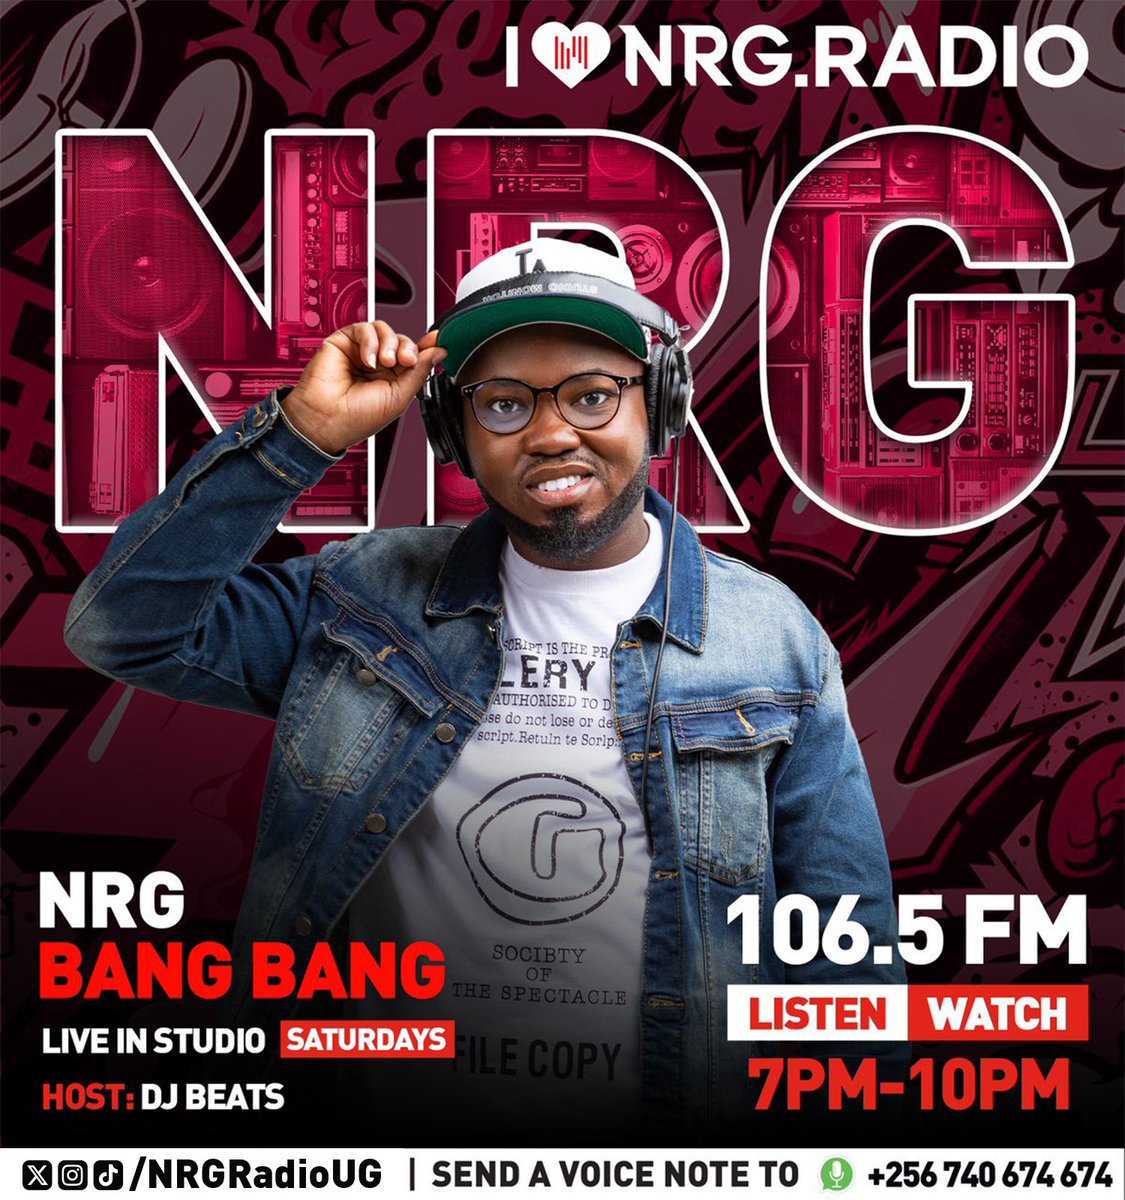 Ssaawa ya ndongo🔥🎶 

Tune in to 106.5 for the ultimate Saturday party with MR LET THE MUSIC SPEAK @Djbeats_UG 💯

#NRGRadioUG | #NRGBangBang